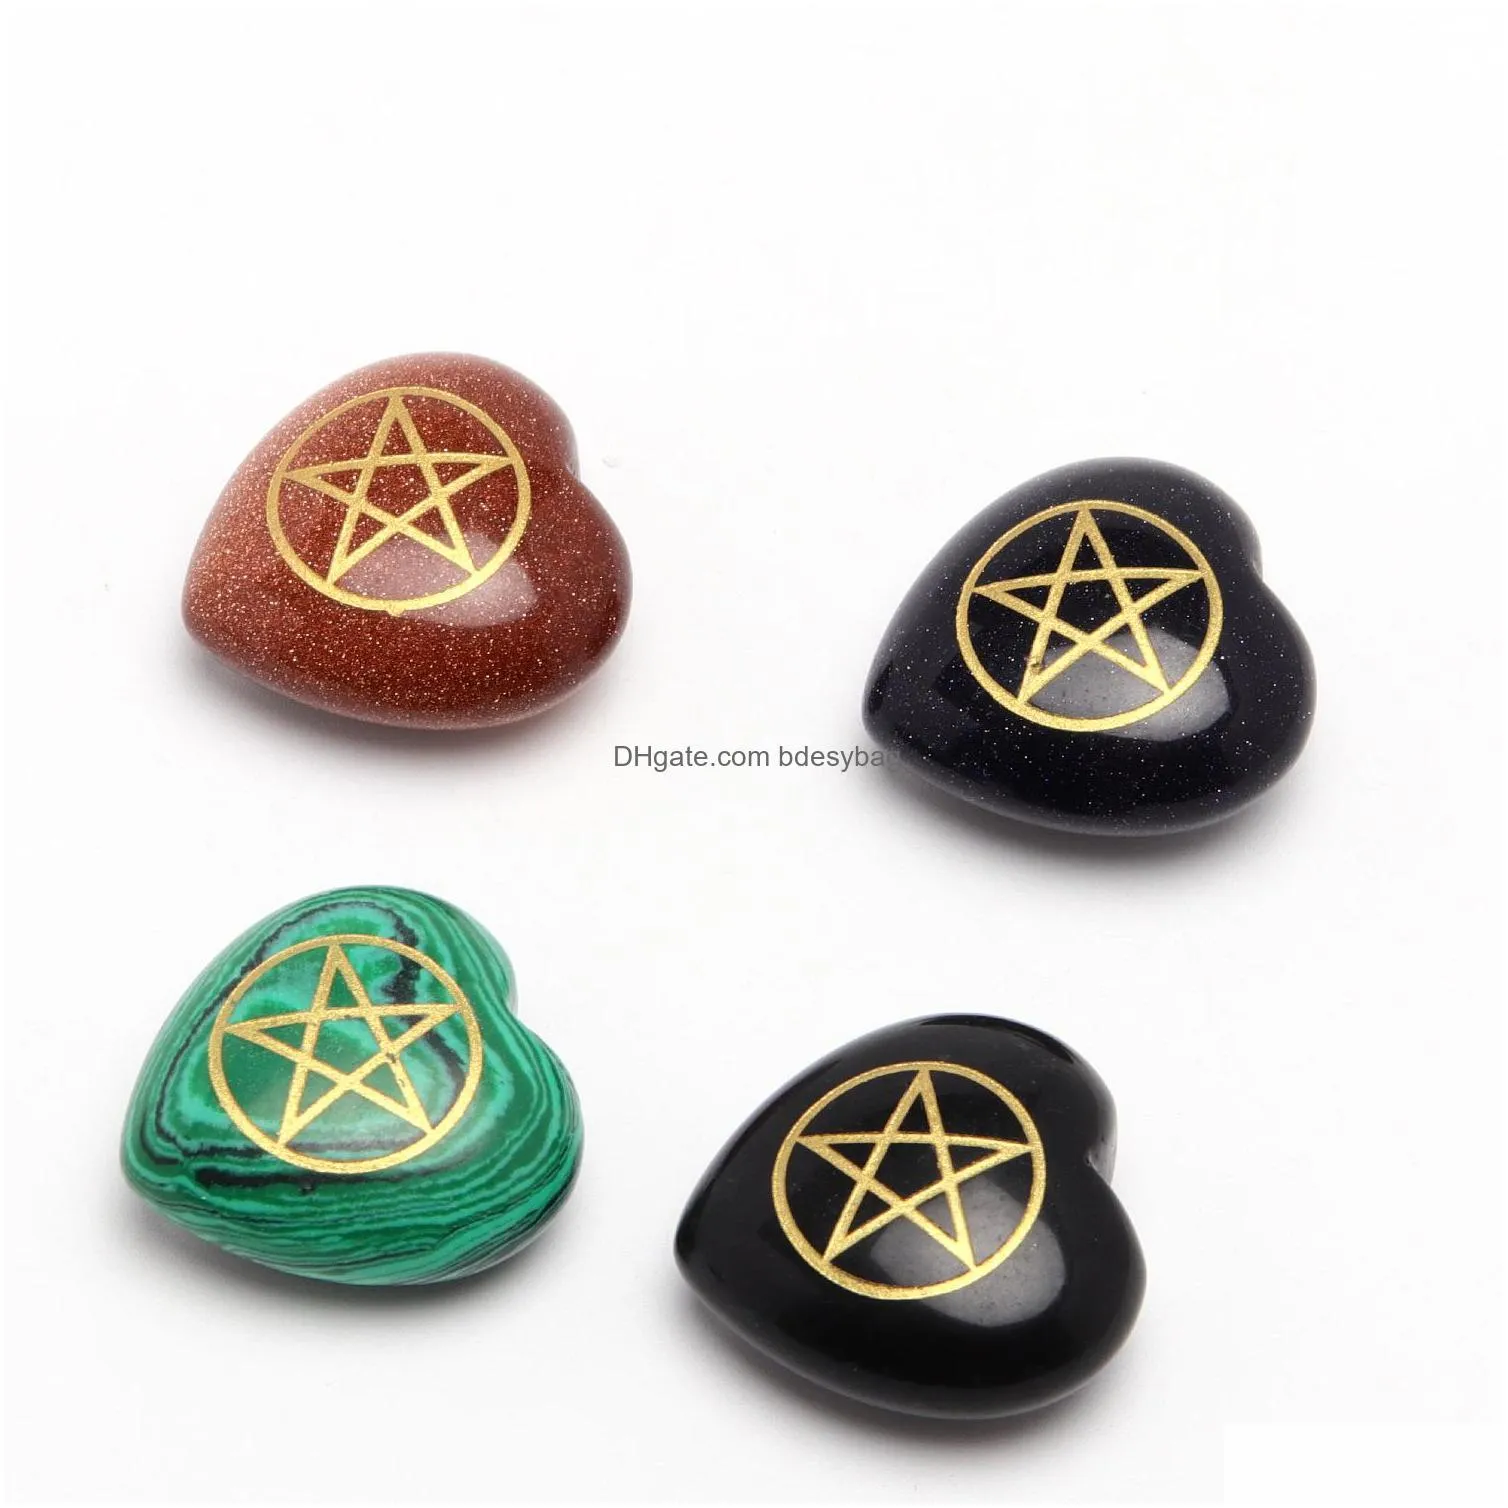 natural stone heart shape pendant with pentagram kore symbol of earth goddess in ancient egyptian culture for men and women